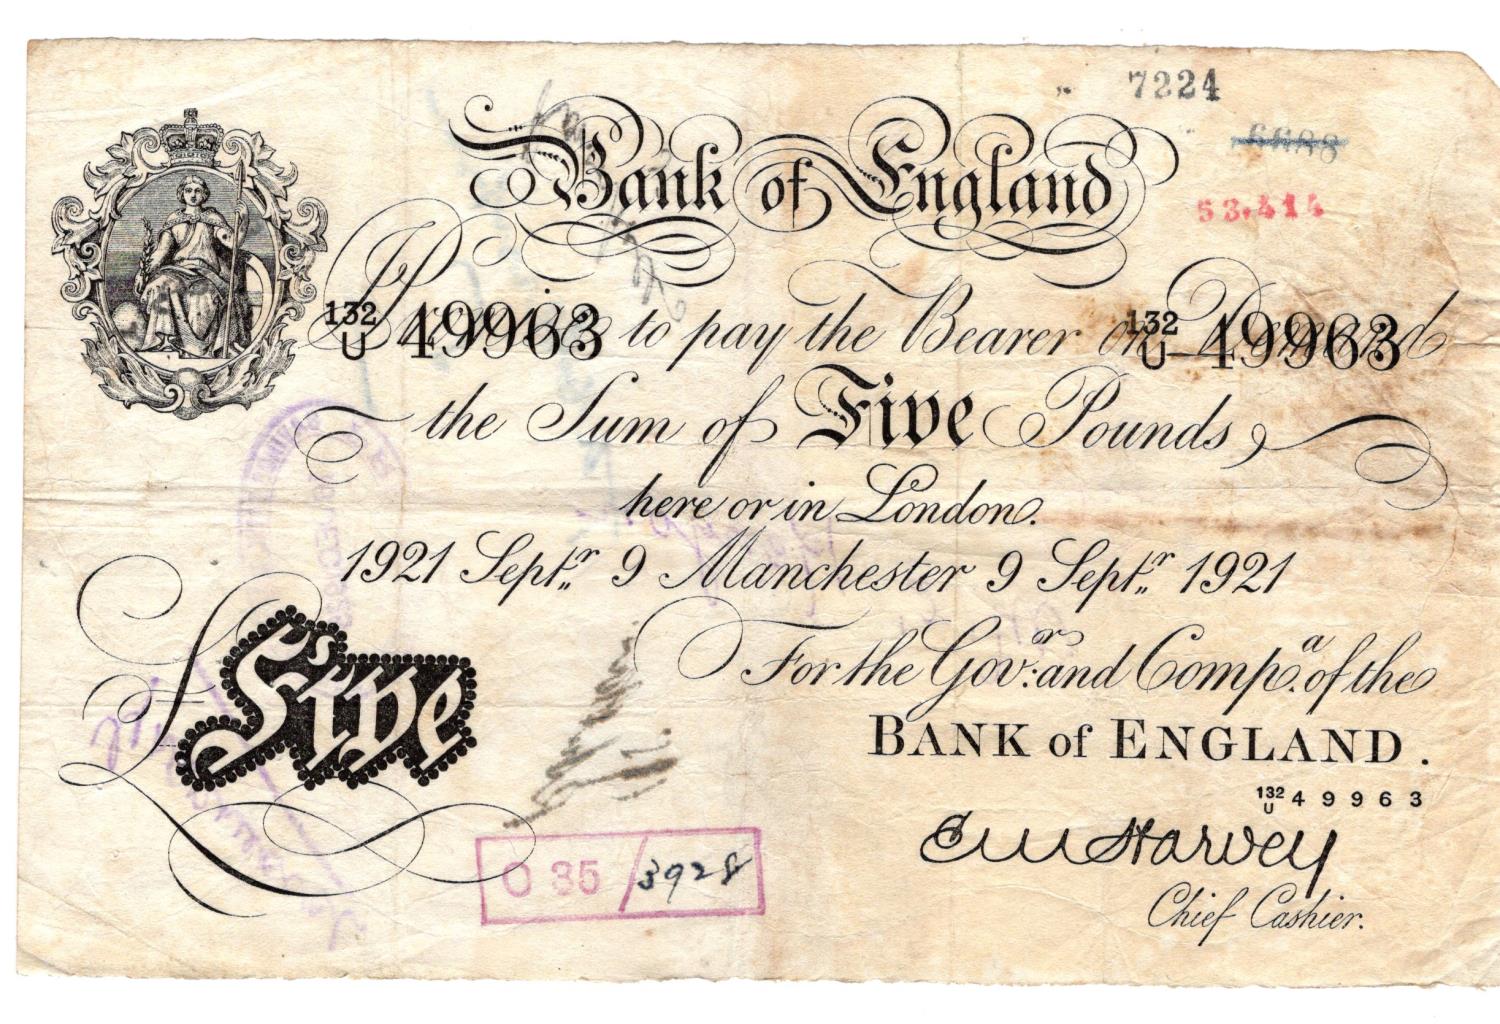 Harvey 5 Pounds dated 9th September 1921, scarce MANCHESTER branch note, serial 132/U 49963 (B209af,